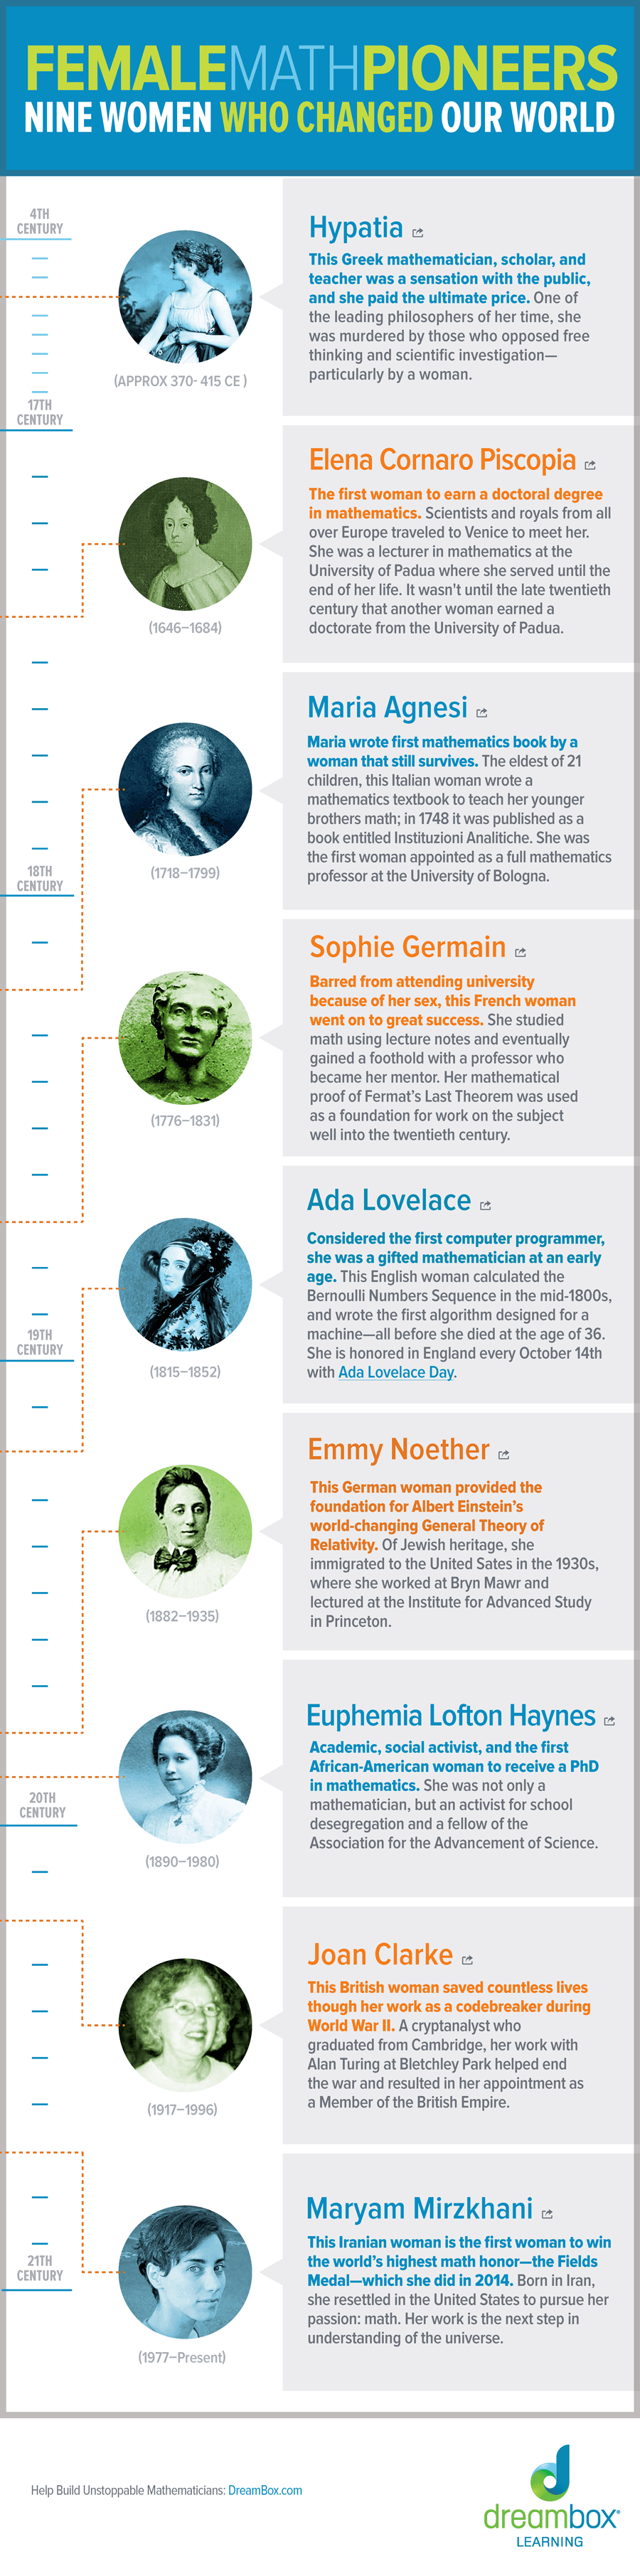 Female Math Pioneers Infographic